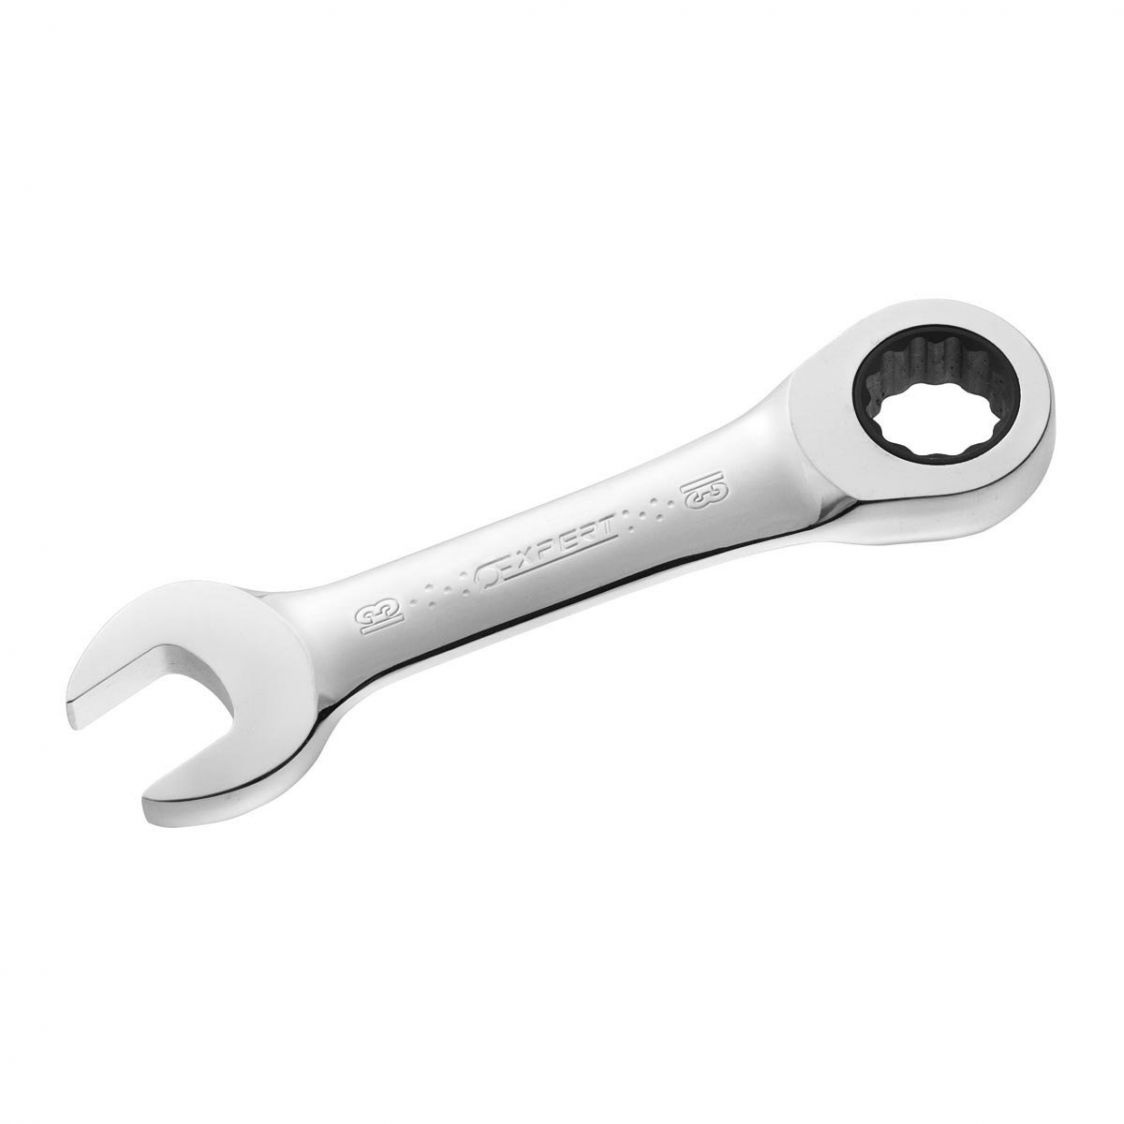 EXPERT by FACOM E110914 - 10mm Metric Stubby Ratchet Combination Spanner